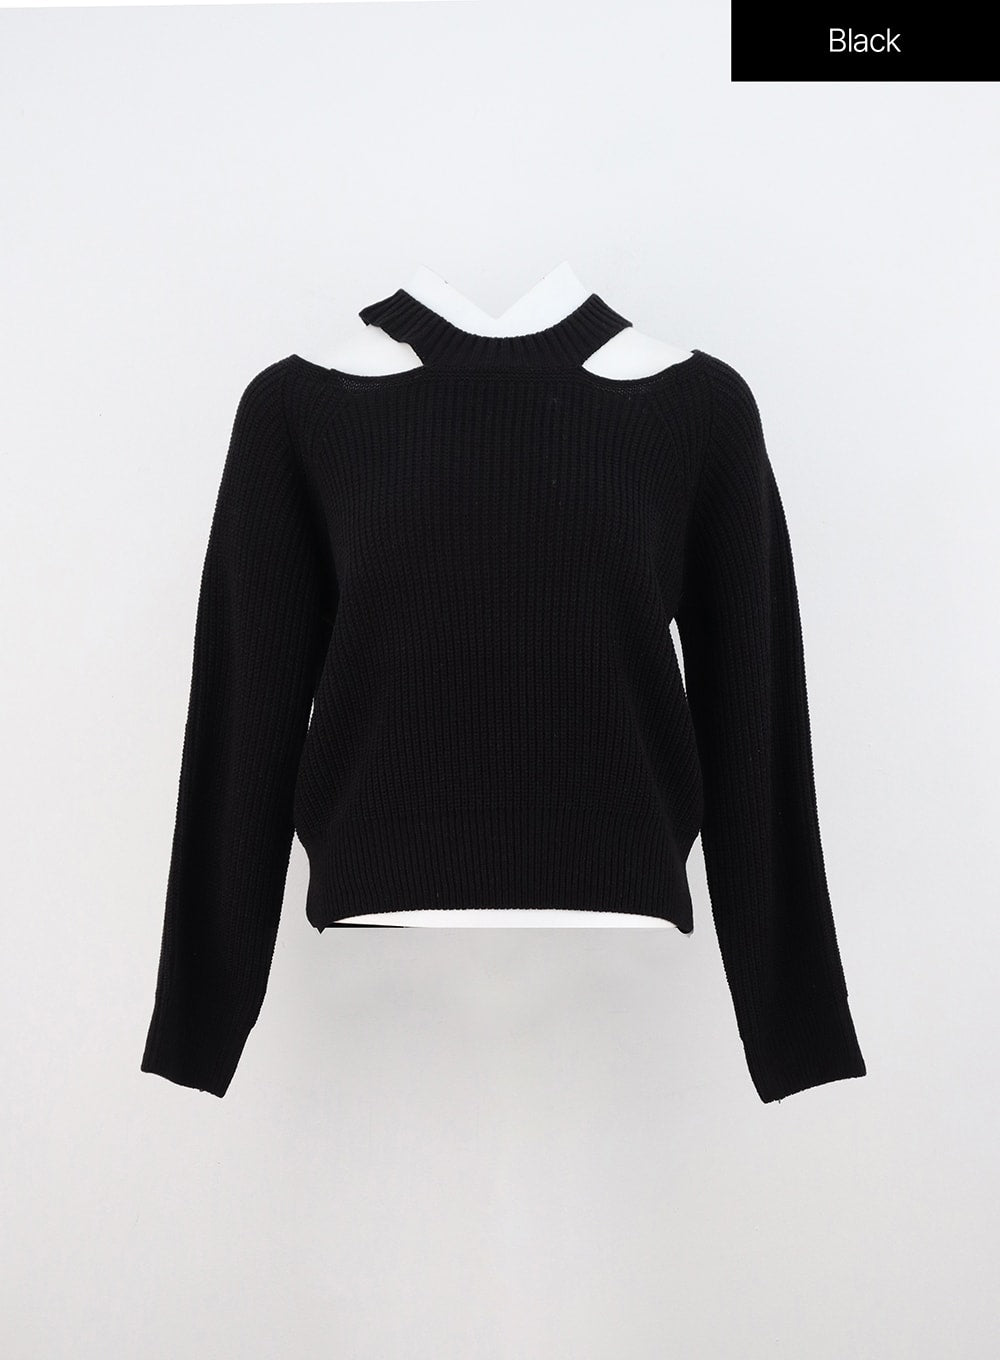 Cut-Out Long Sleeve Knit Sweater ON309